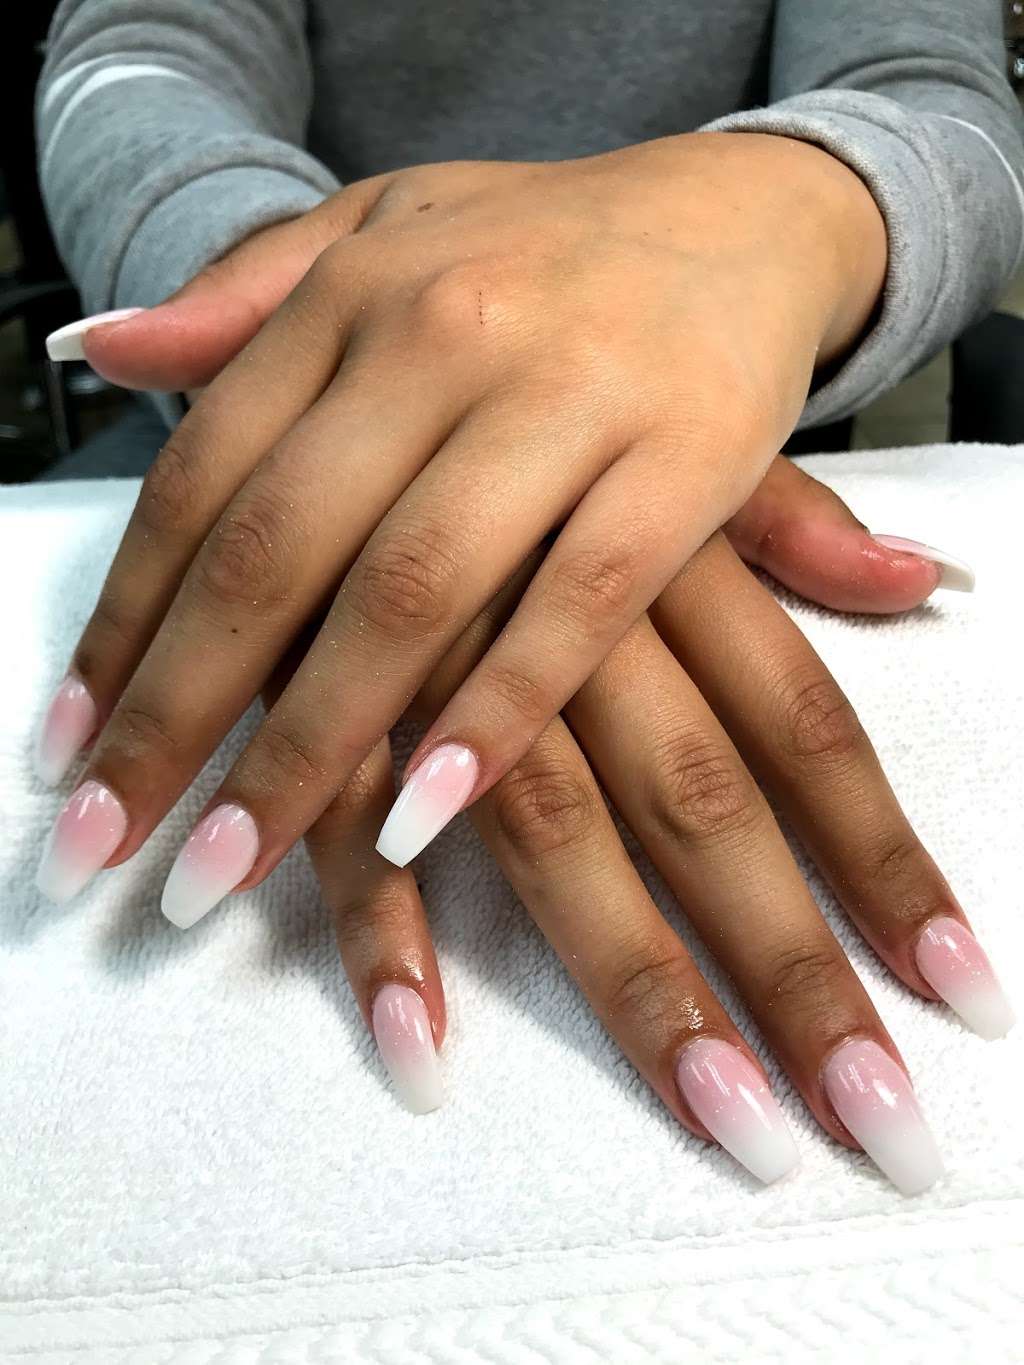 Top Nails | 4550 S Maryland Pkwy #22, Las Vegas, NV 89119, USA | Phone: (702) 739-3002